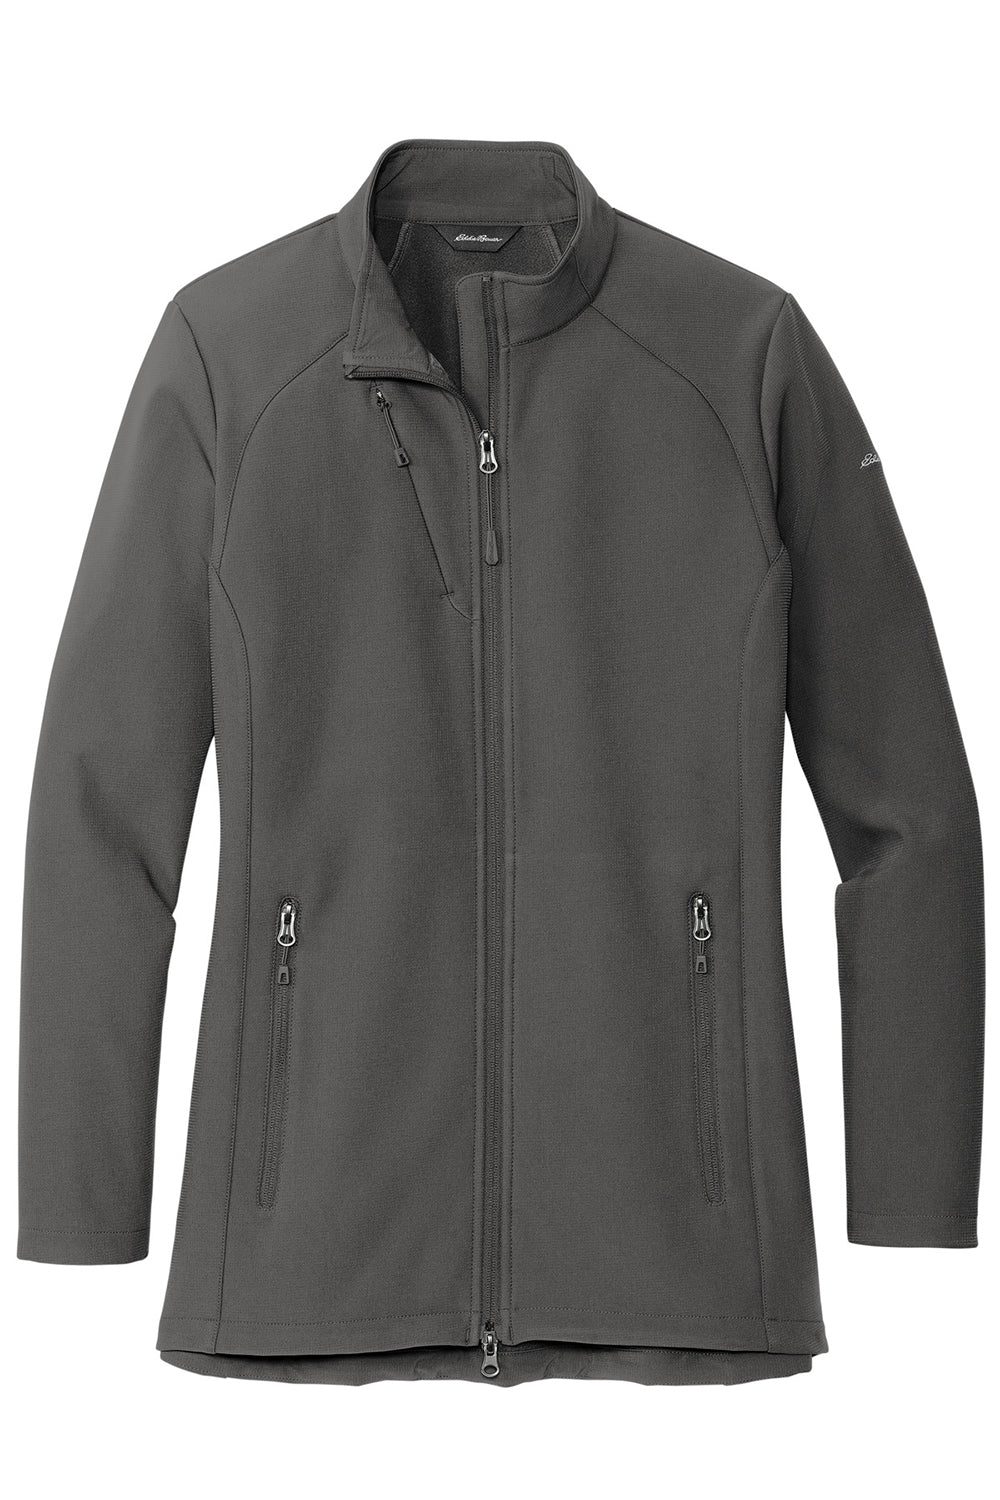 Eddie Bauer EB545 Womens Stretch Water Resistant Full Zip Soft Shell Jacket Iron Gate Grey Flat Front